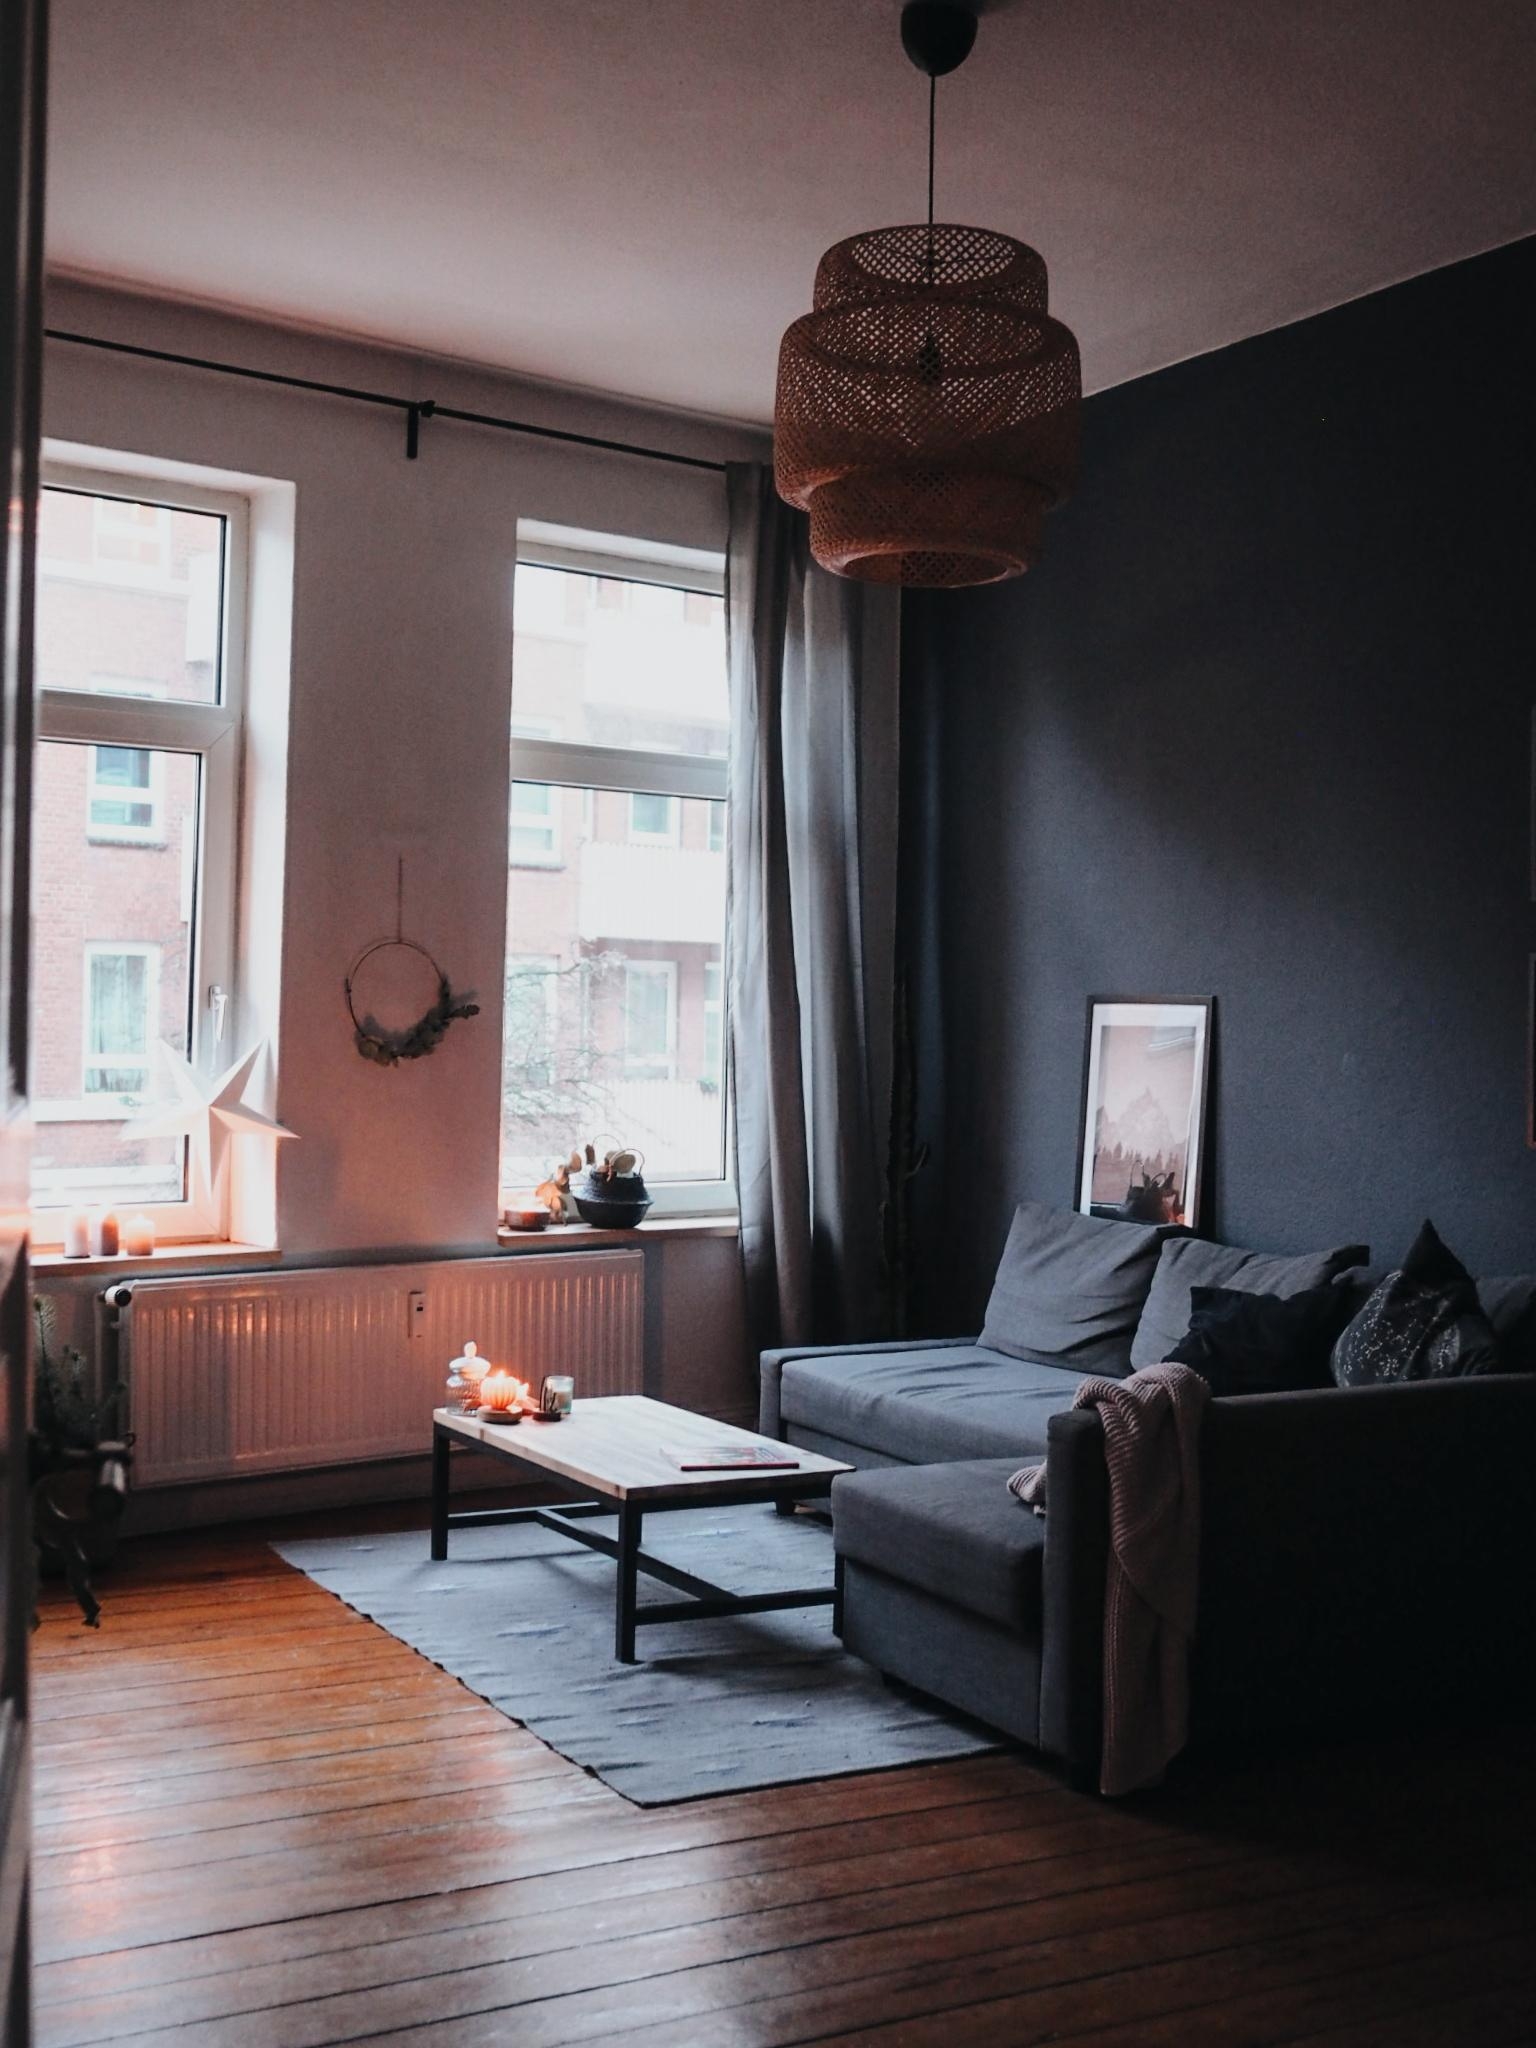 Home sweet home. 

#interior #altbau #candles #hygge